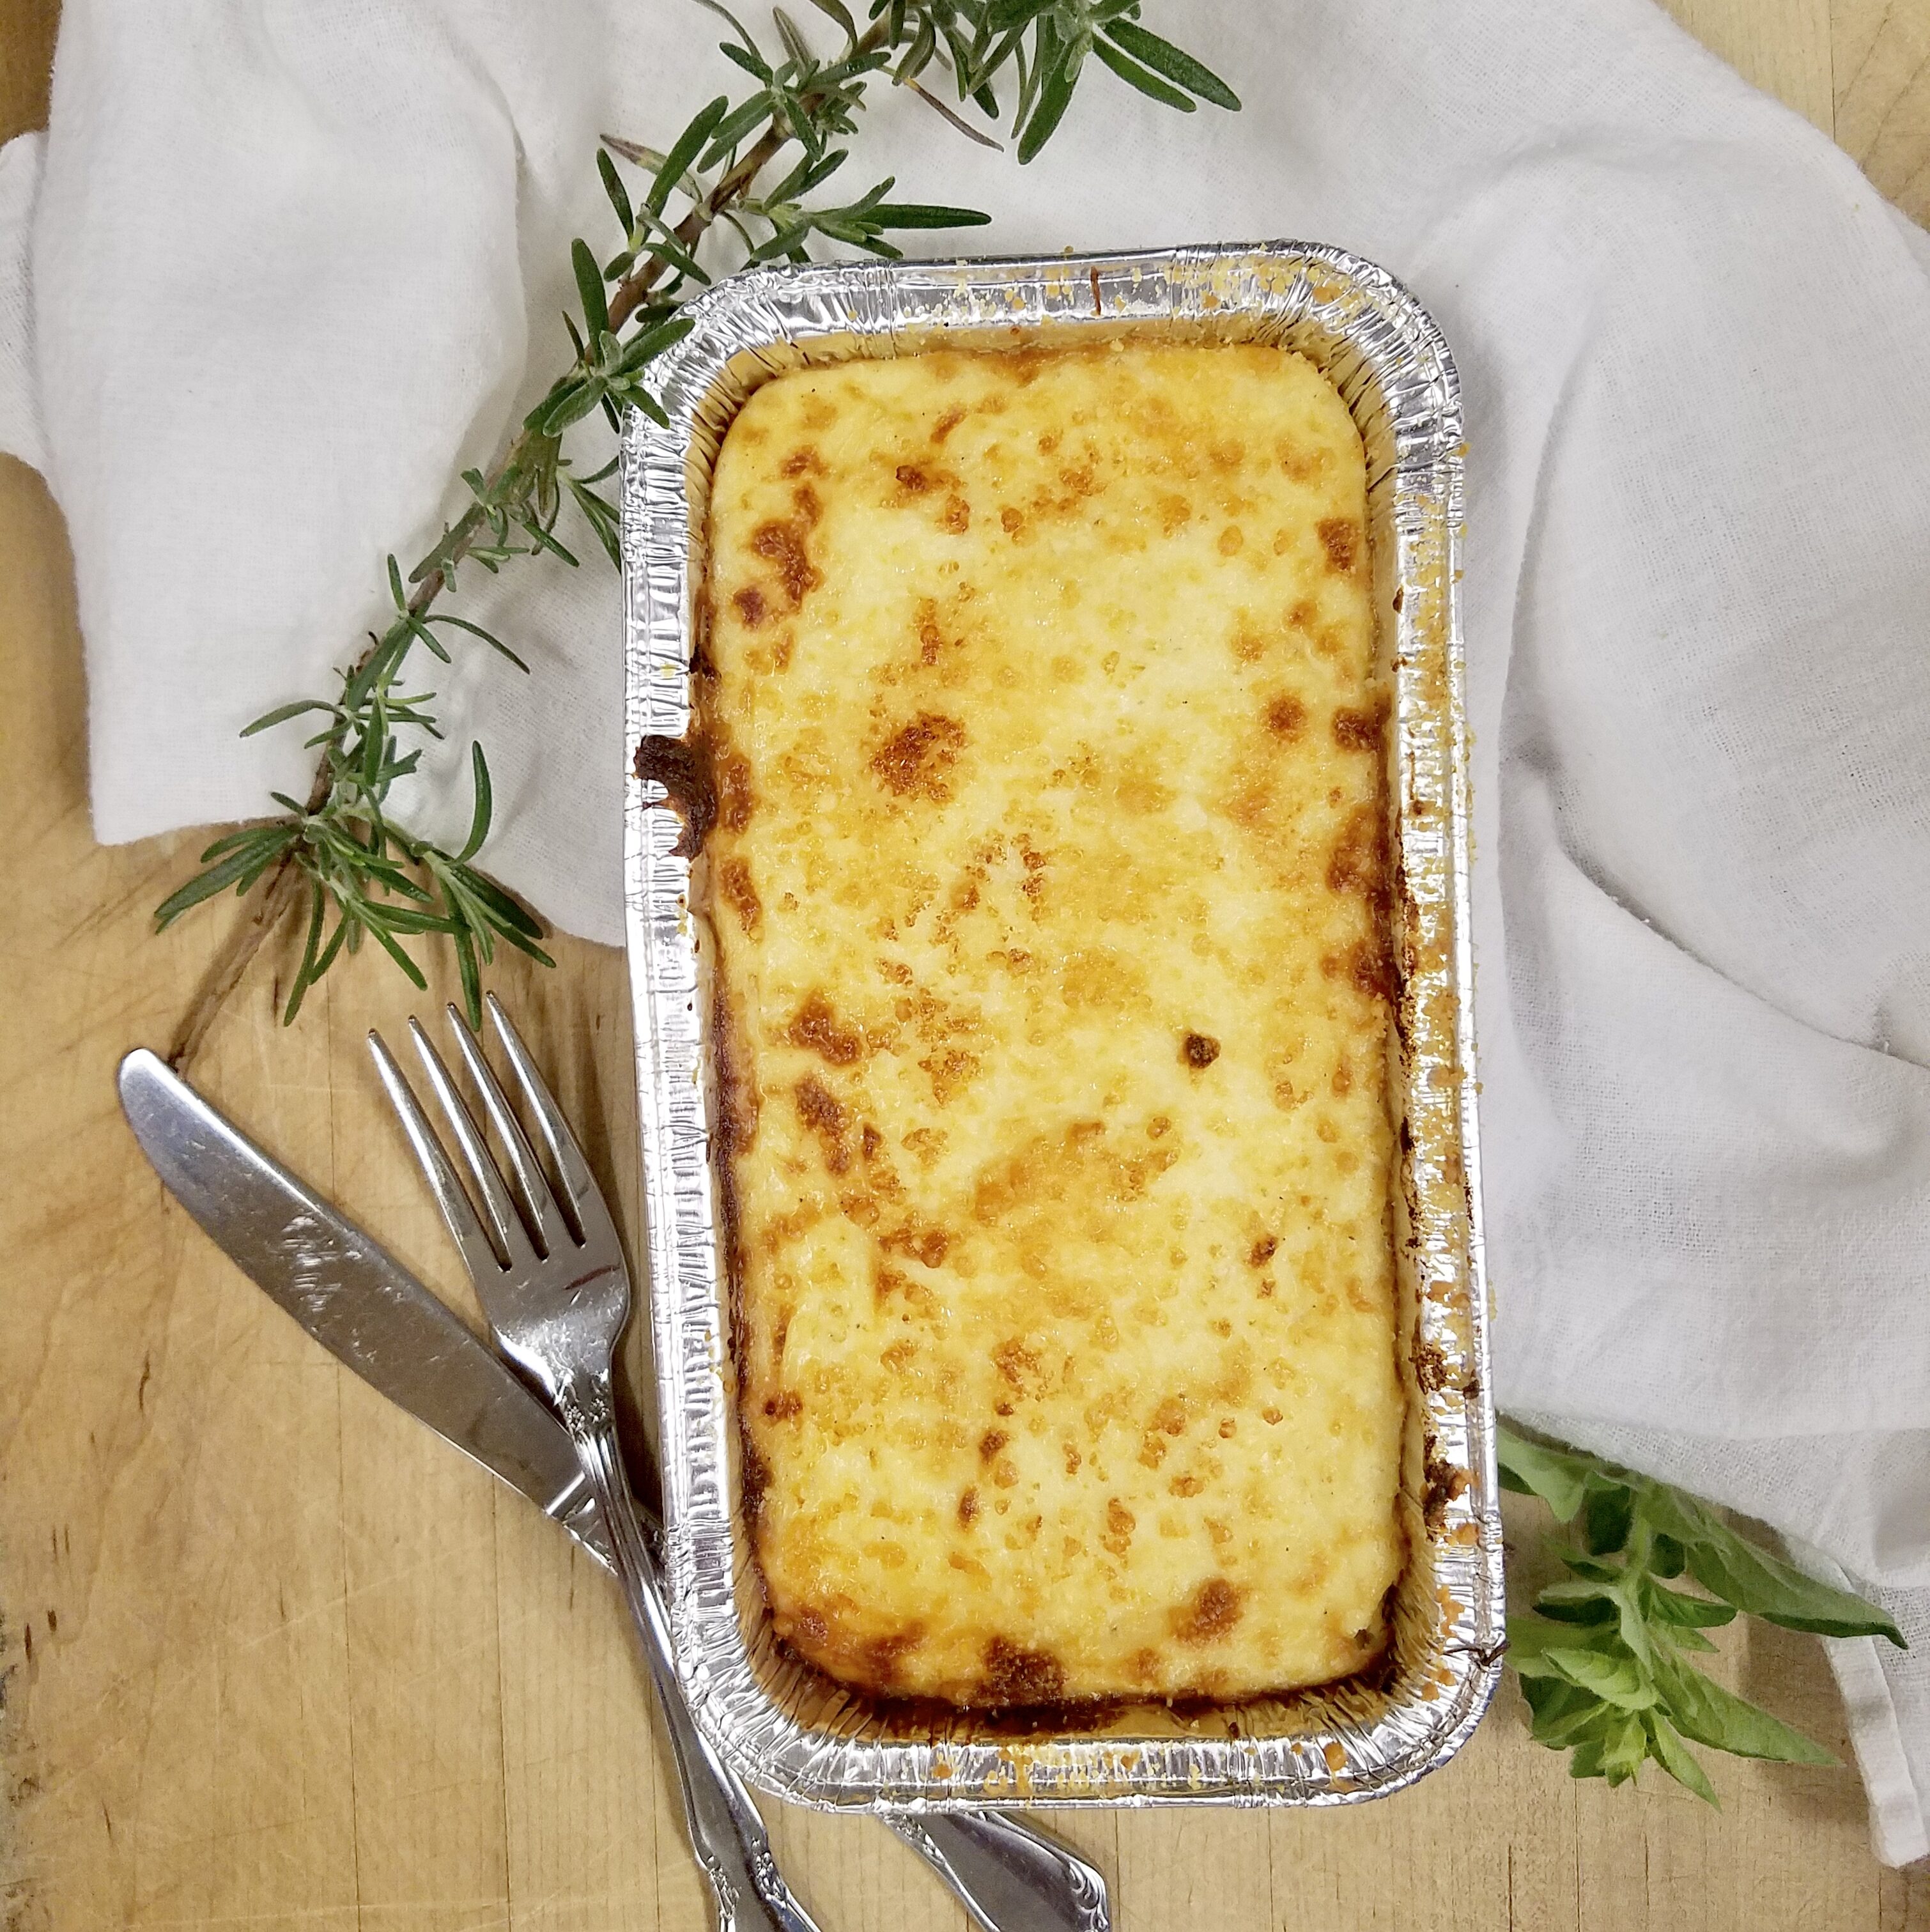 <span  class="uc_style_uc_tiles_grid_image_elementor_uc_items_attribute_title" style="color:#ffffff;">Have you tried our Pastitsio? You're going to LOVE this "Greek Lasagna"</span>